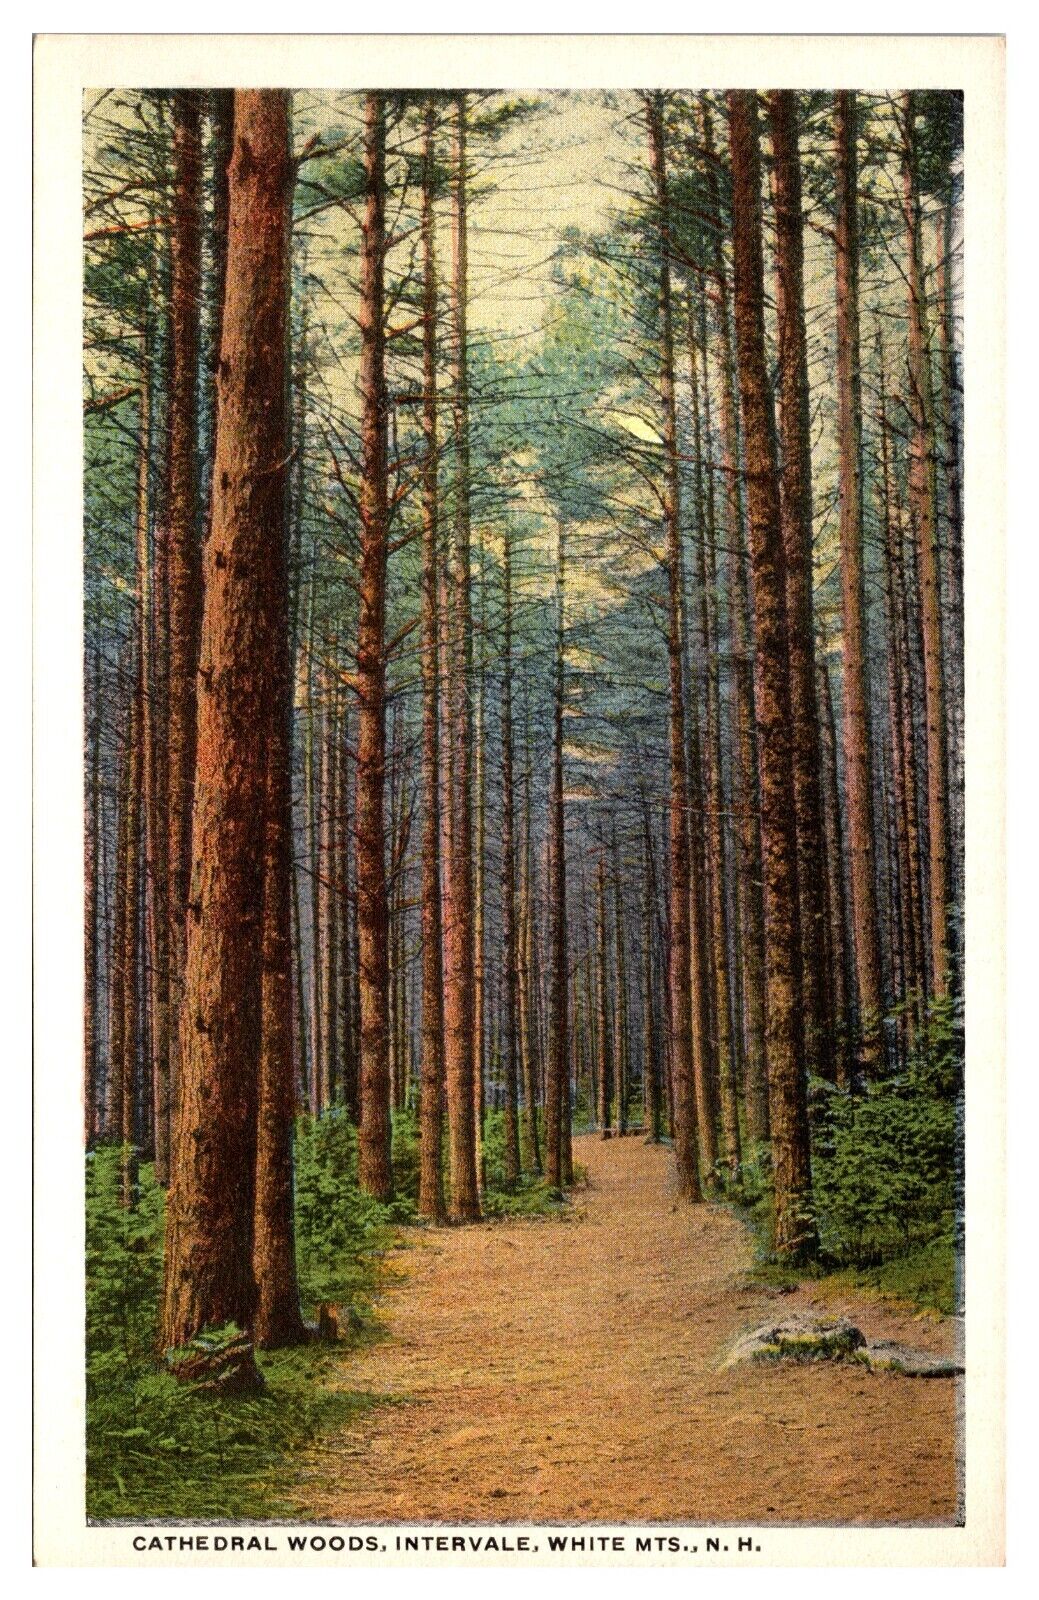 ANTQ Cathedral Woods, Tree Lined Path, Scenic Landscape, Intervale, NH